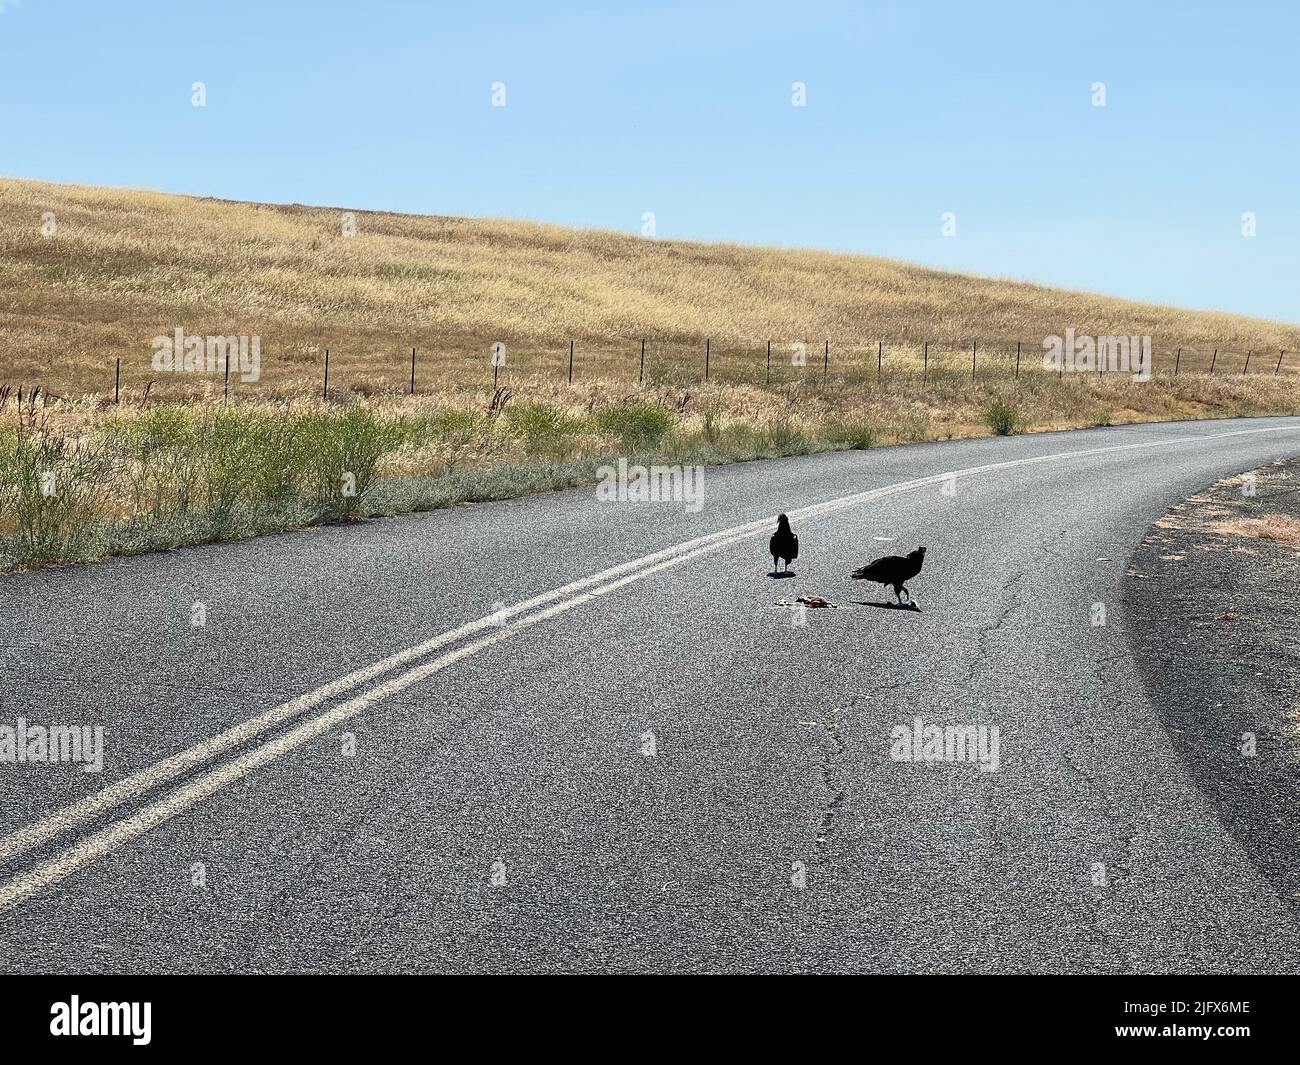 Two Vultures eating a dead animal in the road in California, USA Stock Photo